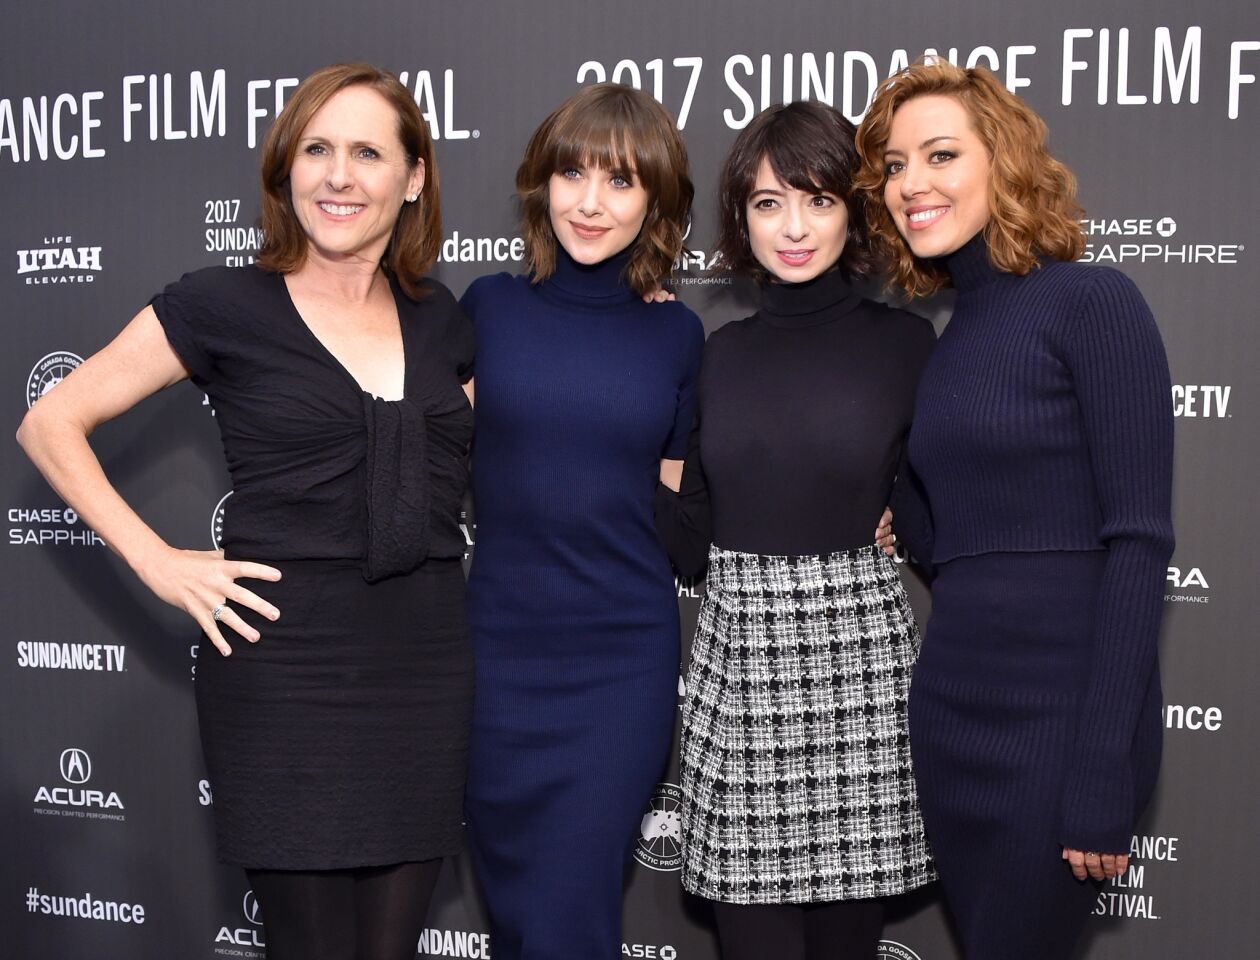 Actresses Molly Shannon, Alison Brie, Kate Micucci, and Aubrey Plaza attend "The Little Hours" premiere at Library Center Theater.